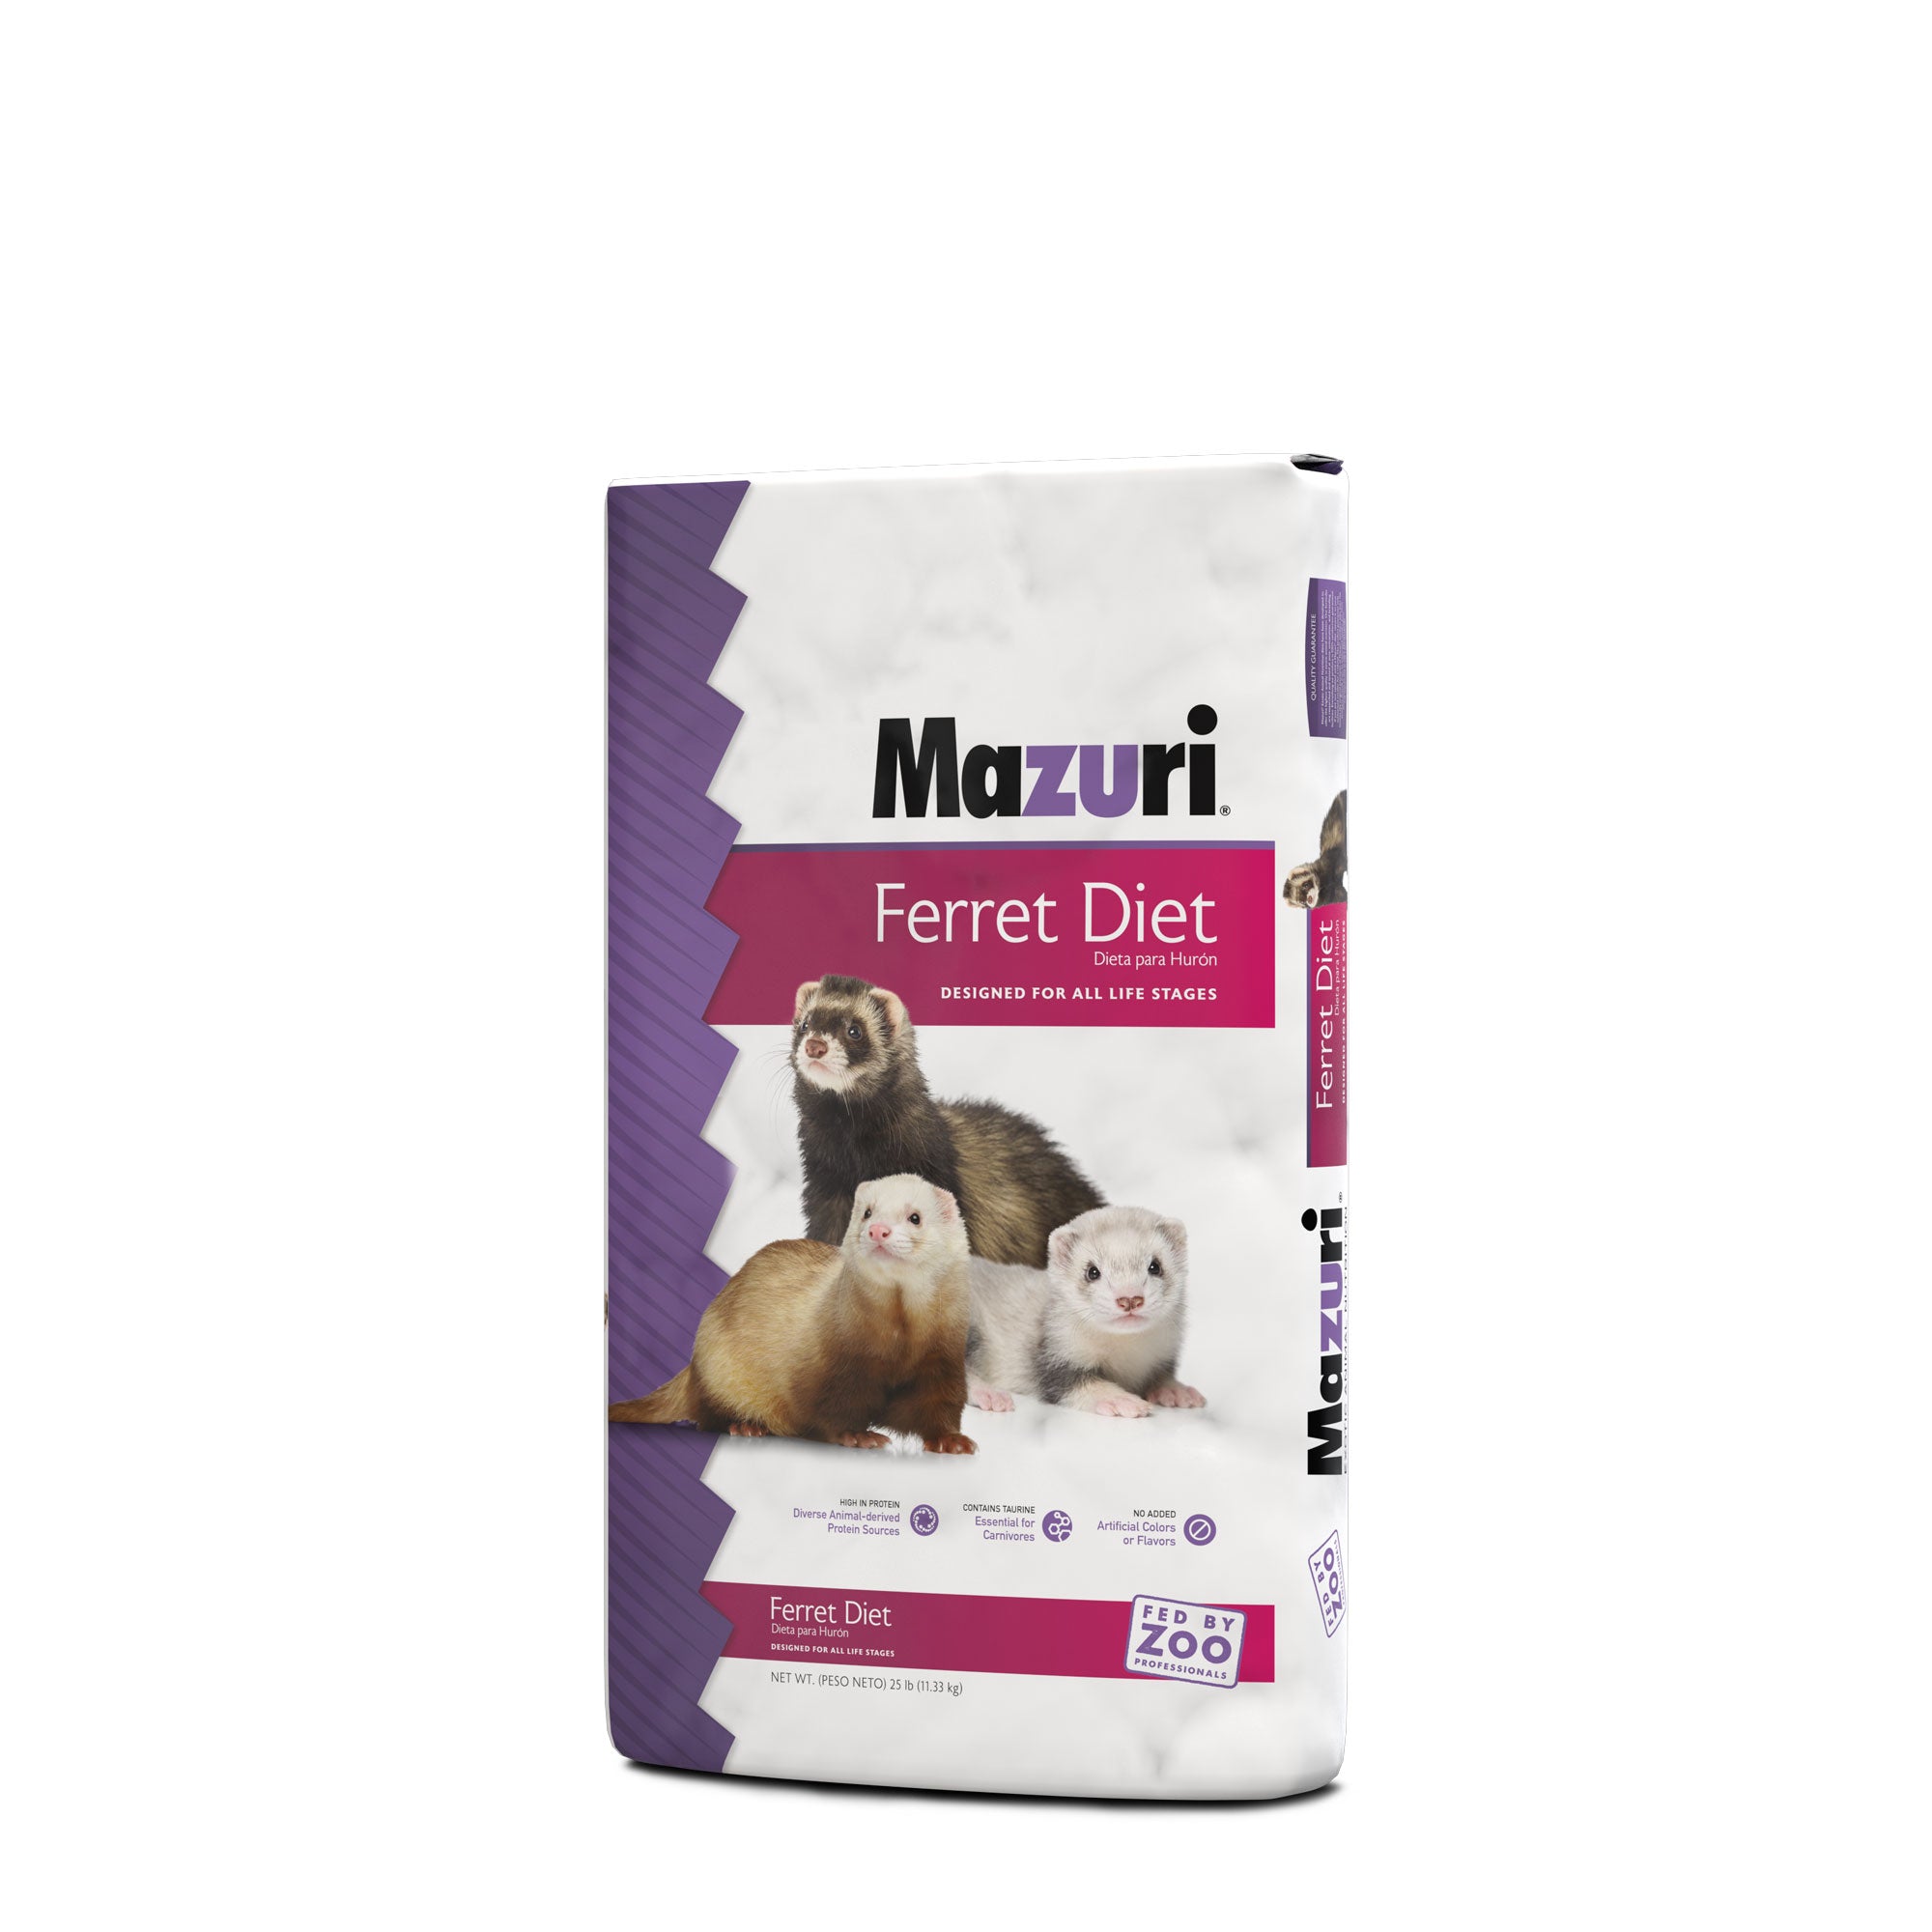 Ferret Diet 25 pound bag front and gusset